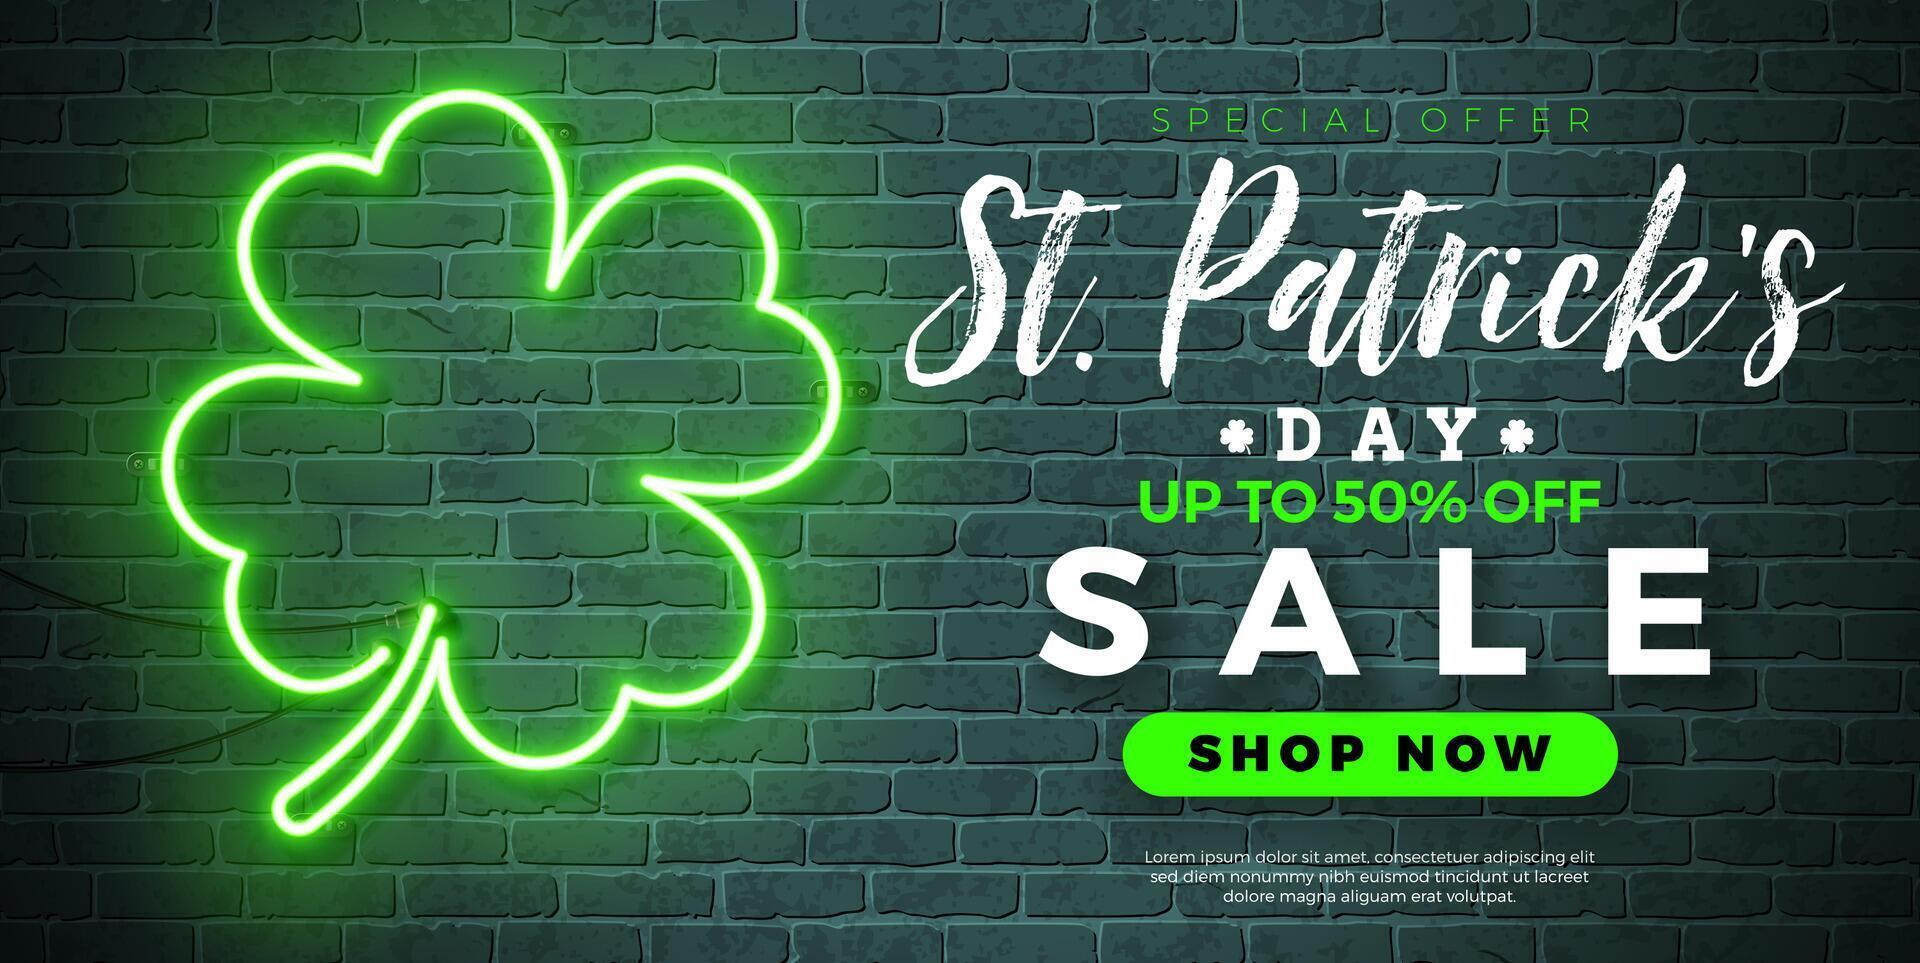 Saint Patrick's Day Sale Banner Illustration with Glowing Clover Leaves Shape Neon Lights on Brick Wall Background. Irish Traditional St. Patricks Day Lucky Celebration Vector Design for Coupon